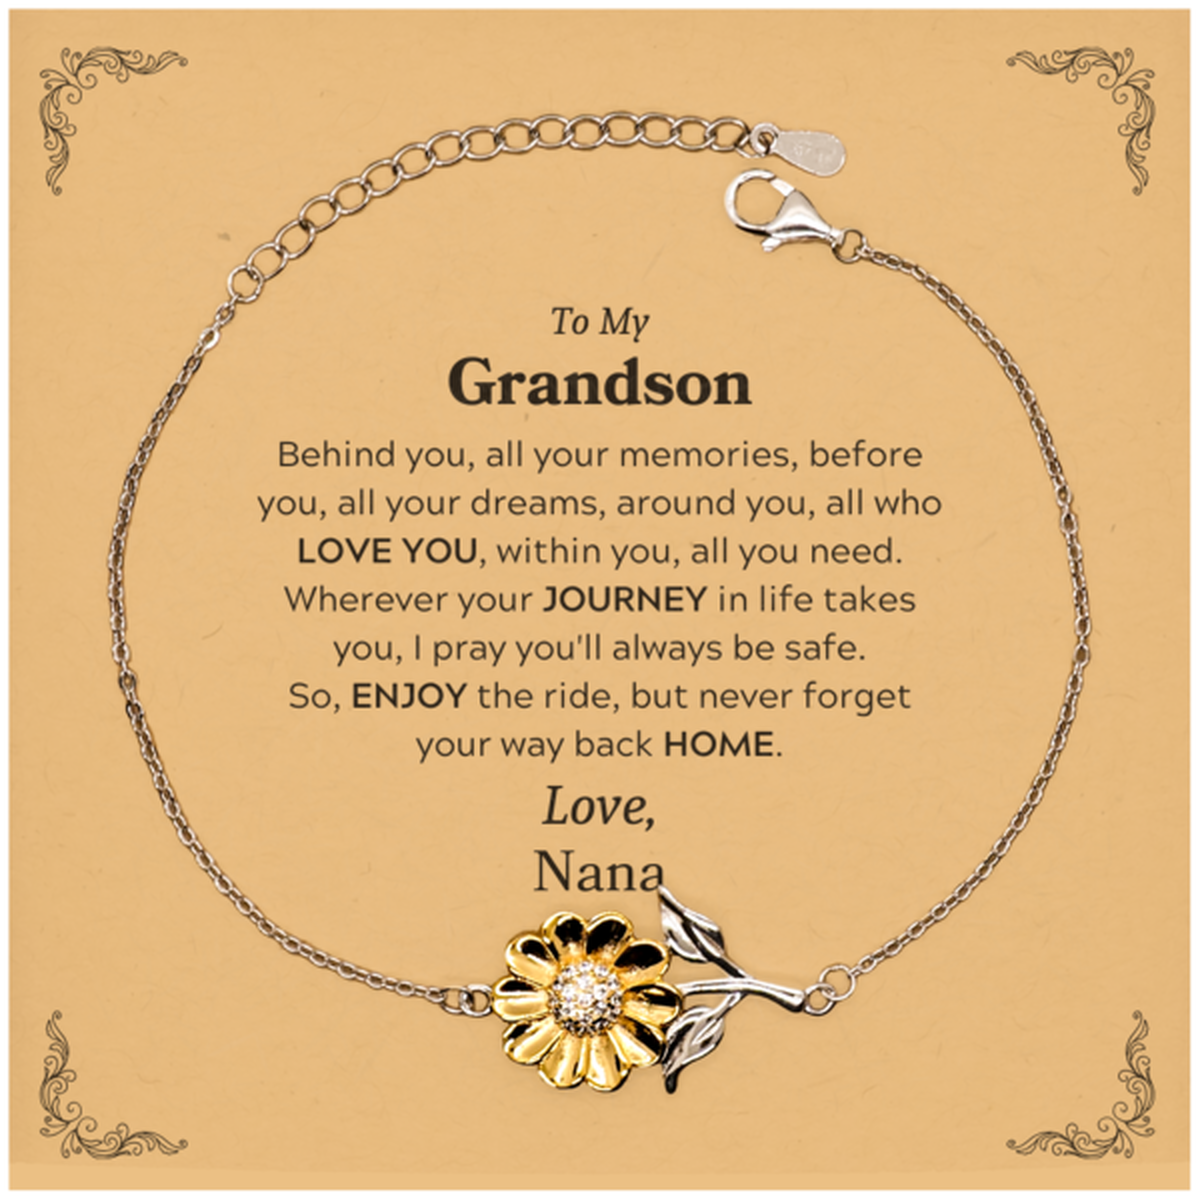 To My Grandson Graduation Gifts from Nana, Grandson Sunflower Bracelet Christmas Birthday Gifts for Grandson Behind you, all your memories, before you, all your dreams. Love, Nana